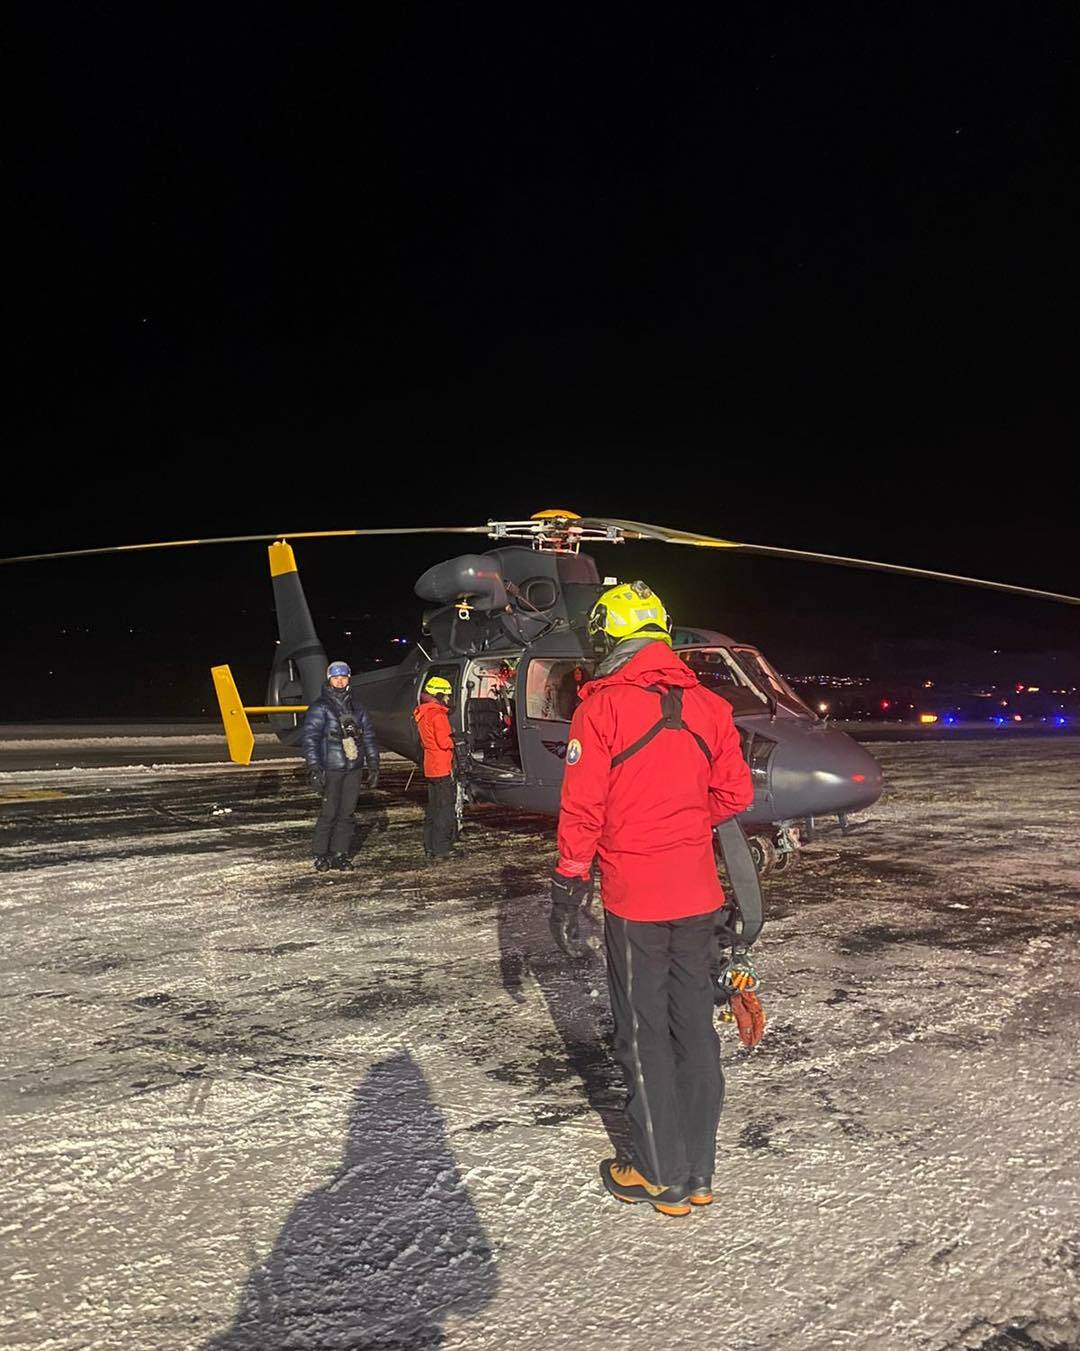 The snowmobiler handed off to B.C. ambulance services at the Kelowna airport. (North Shore Rescue)